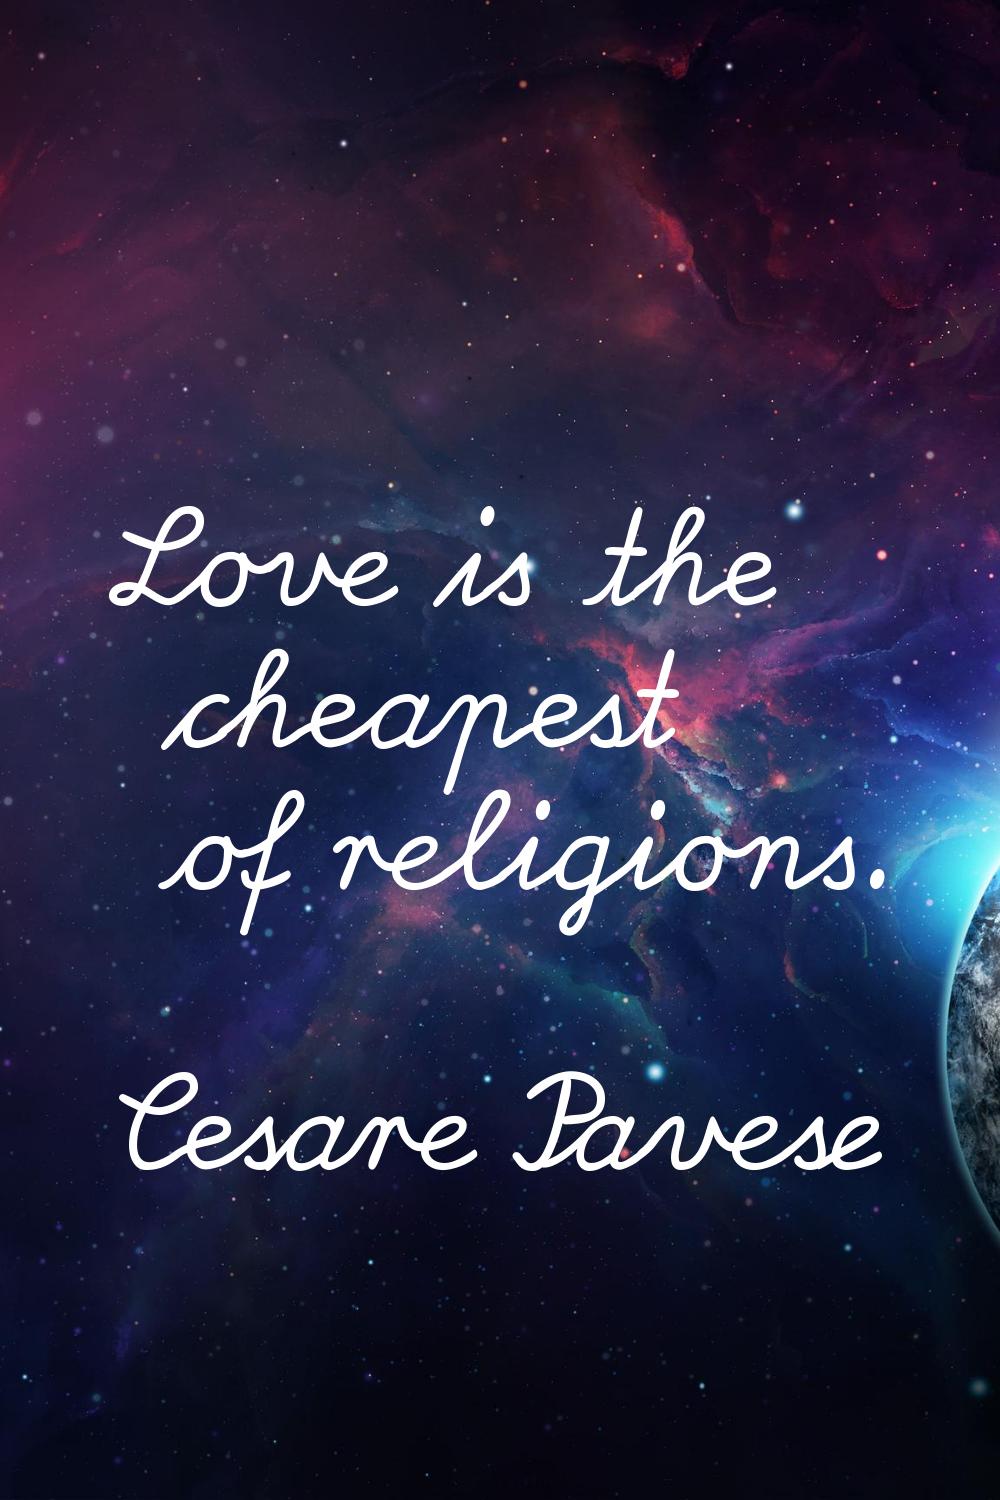 Love is the cheapest of religions.